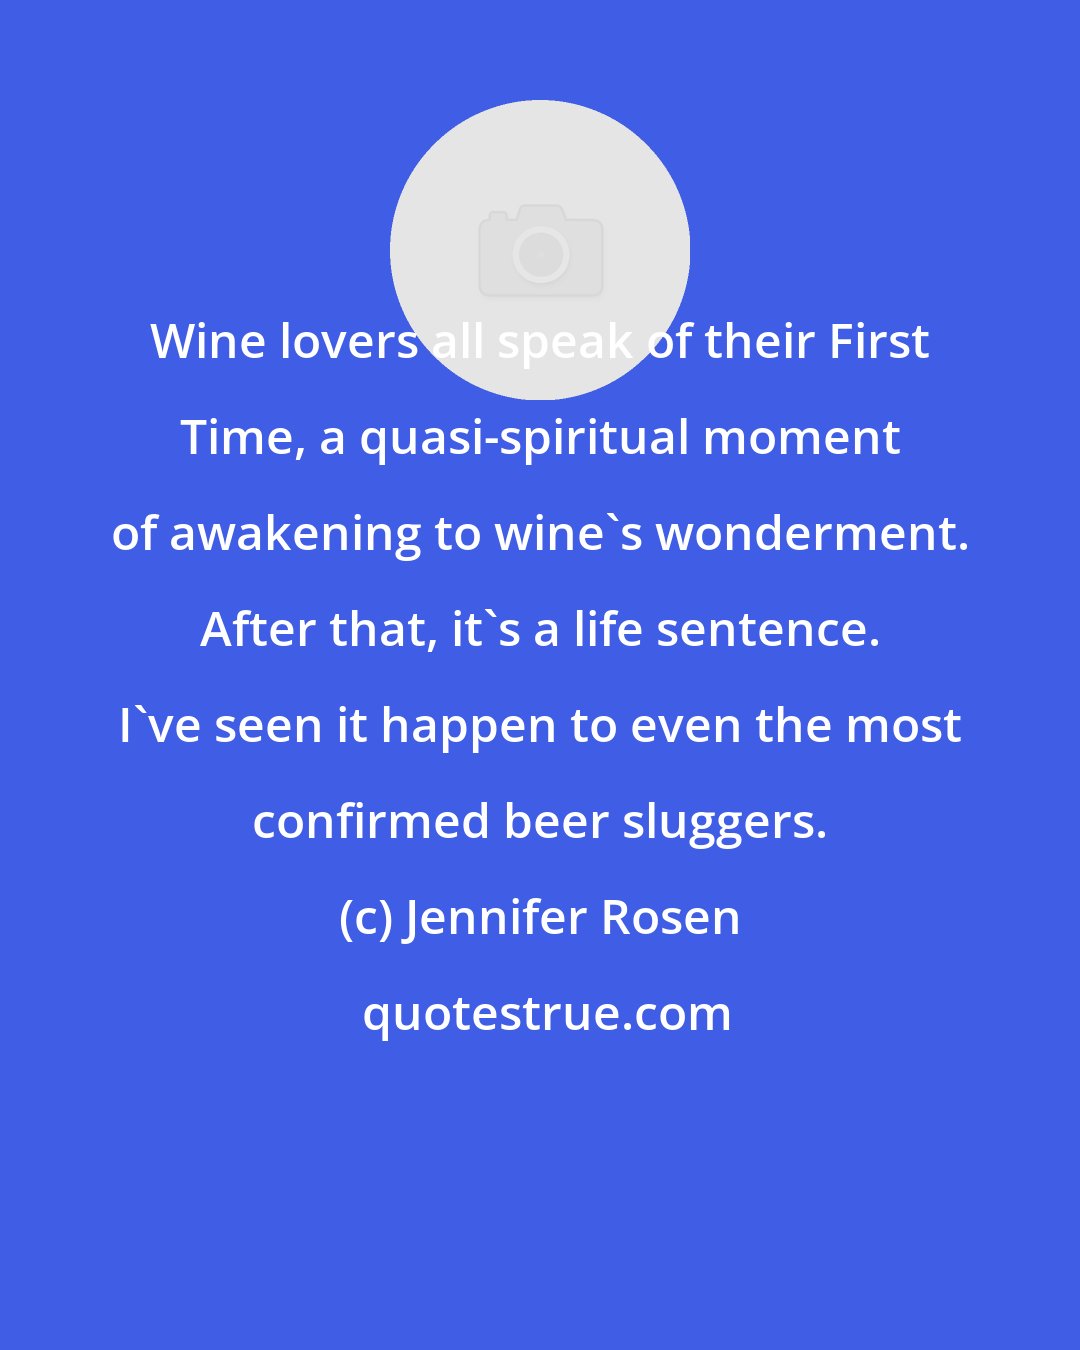 Jennifer Rosen: Wine lovers all speak of their First Time, a quasi-spiritual moment of awakening to wine's wonderment. After that, it's a life sentence. I've seen it happen to even the most confirmed beer sluggers.